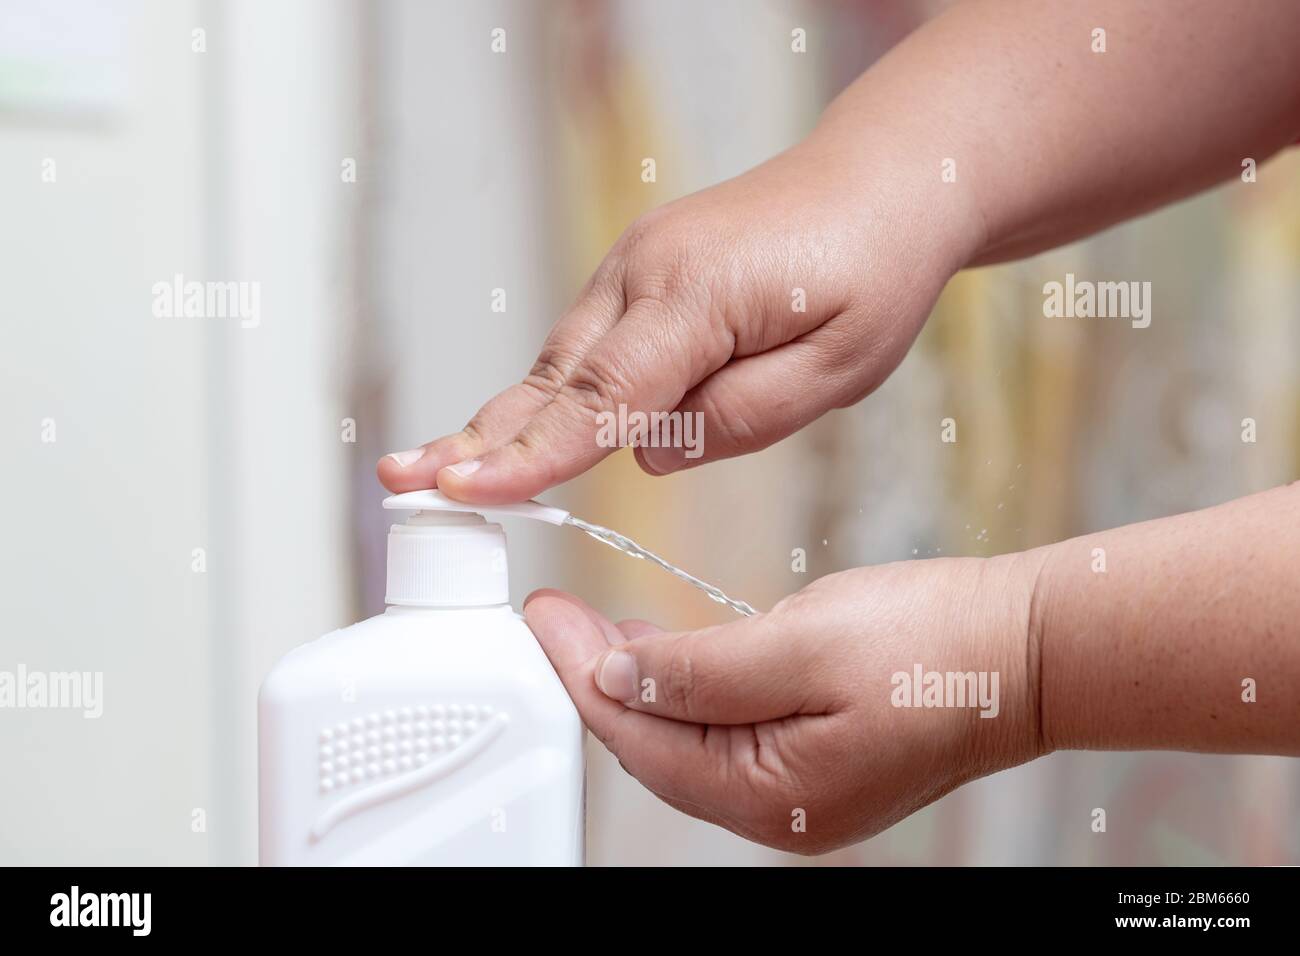 Disinfecting your hands with sanitizer for disinfection and killing the viruses on your hands. Stock Photo